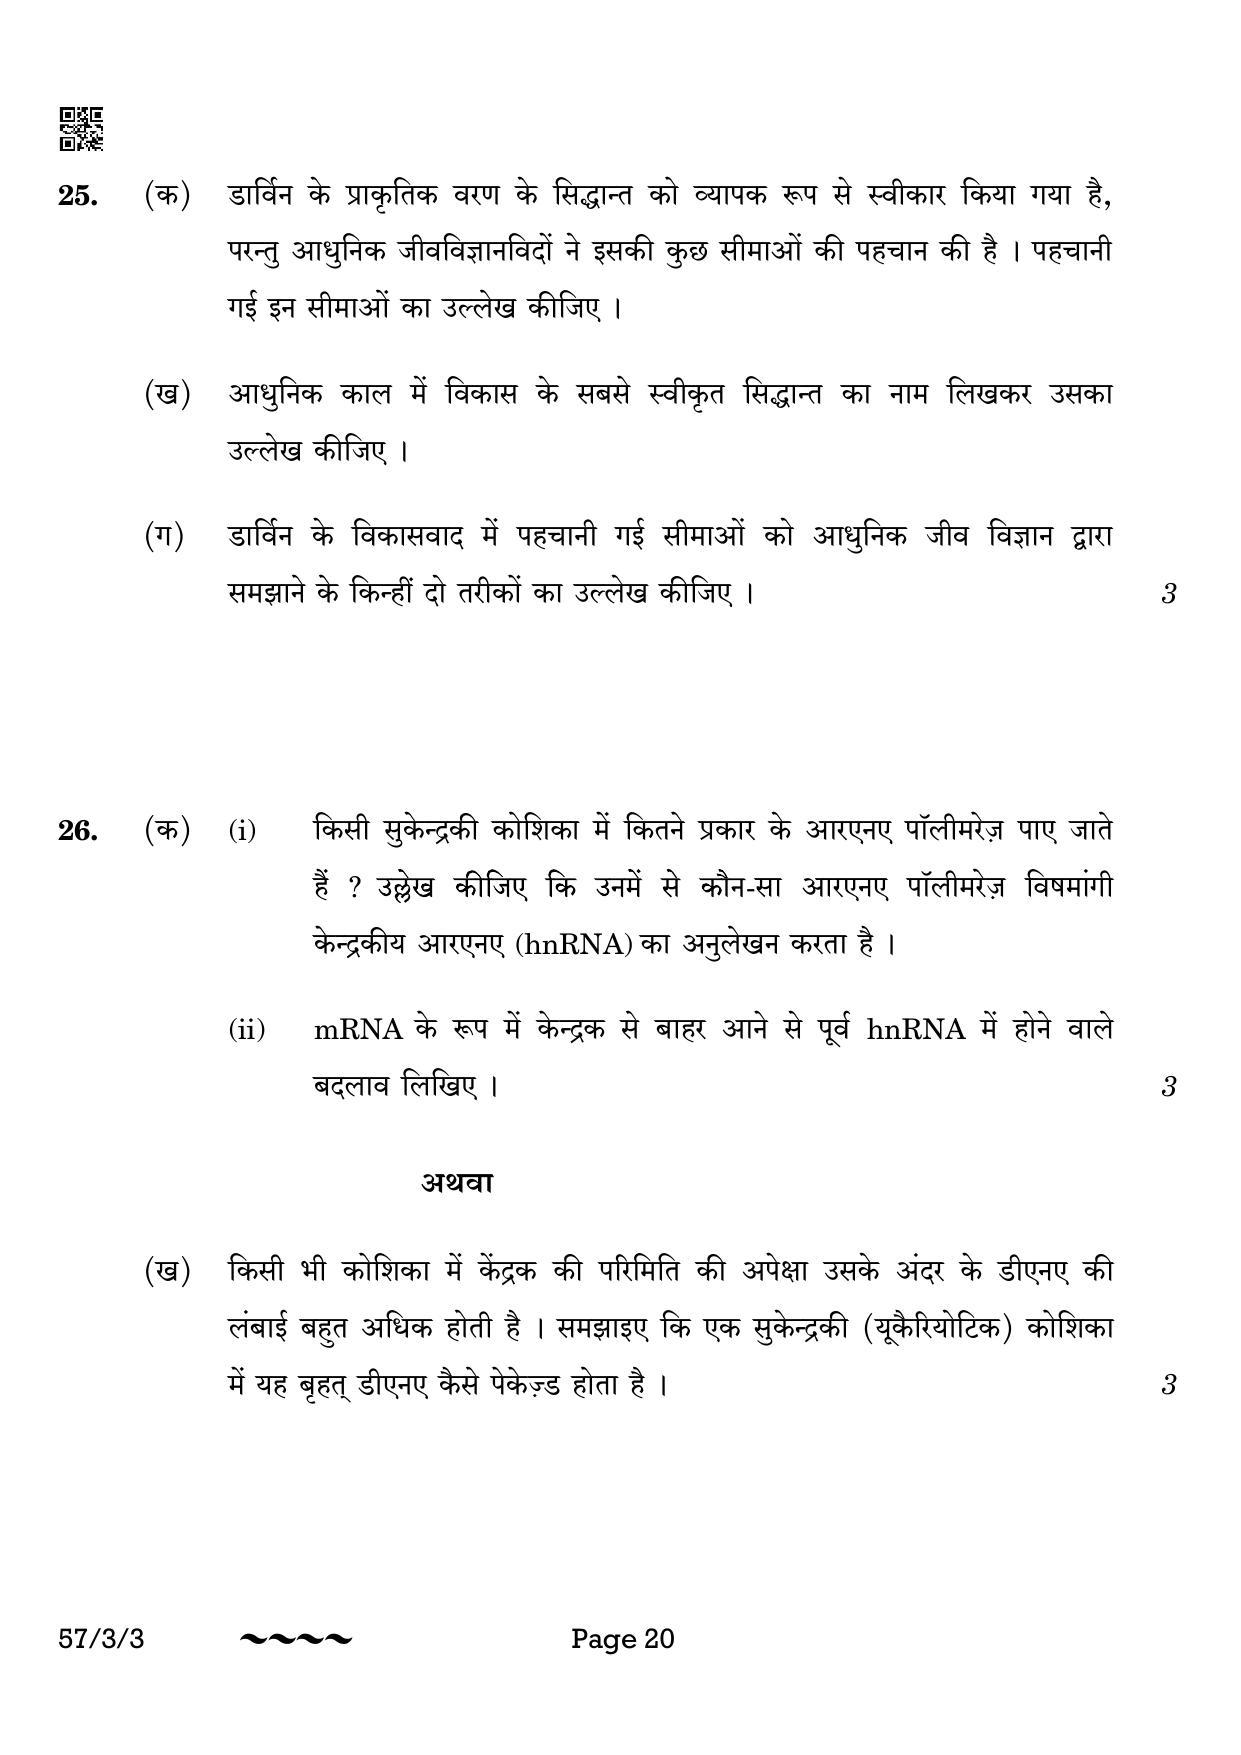 CBSE Class 12 57-3-3 Biology 2023 Question Paper - Page 20